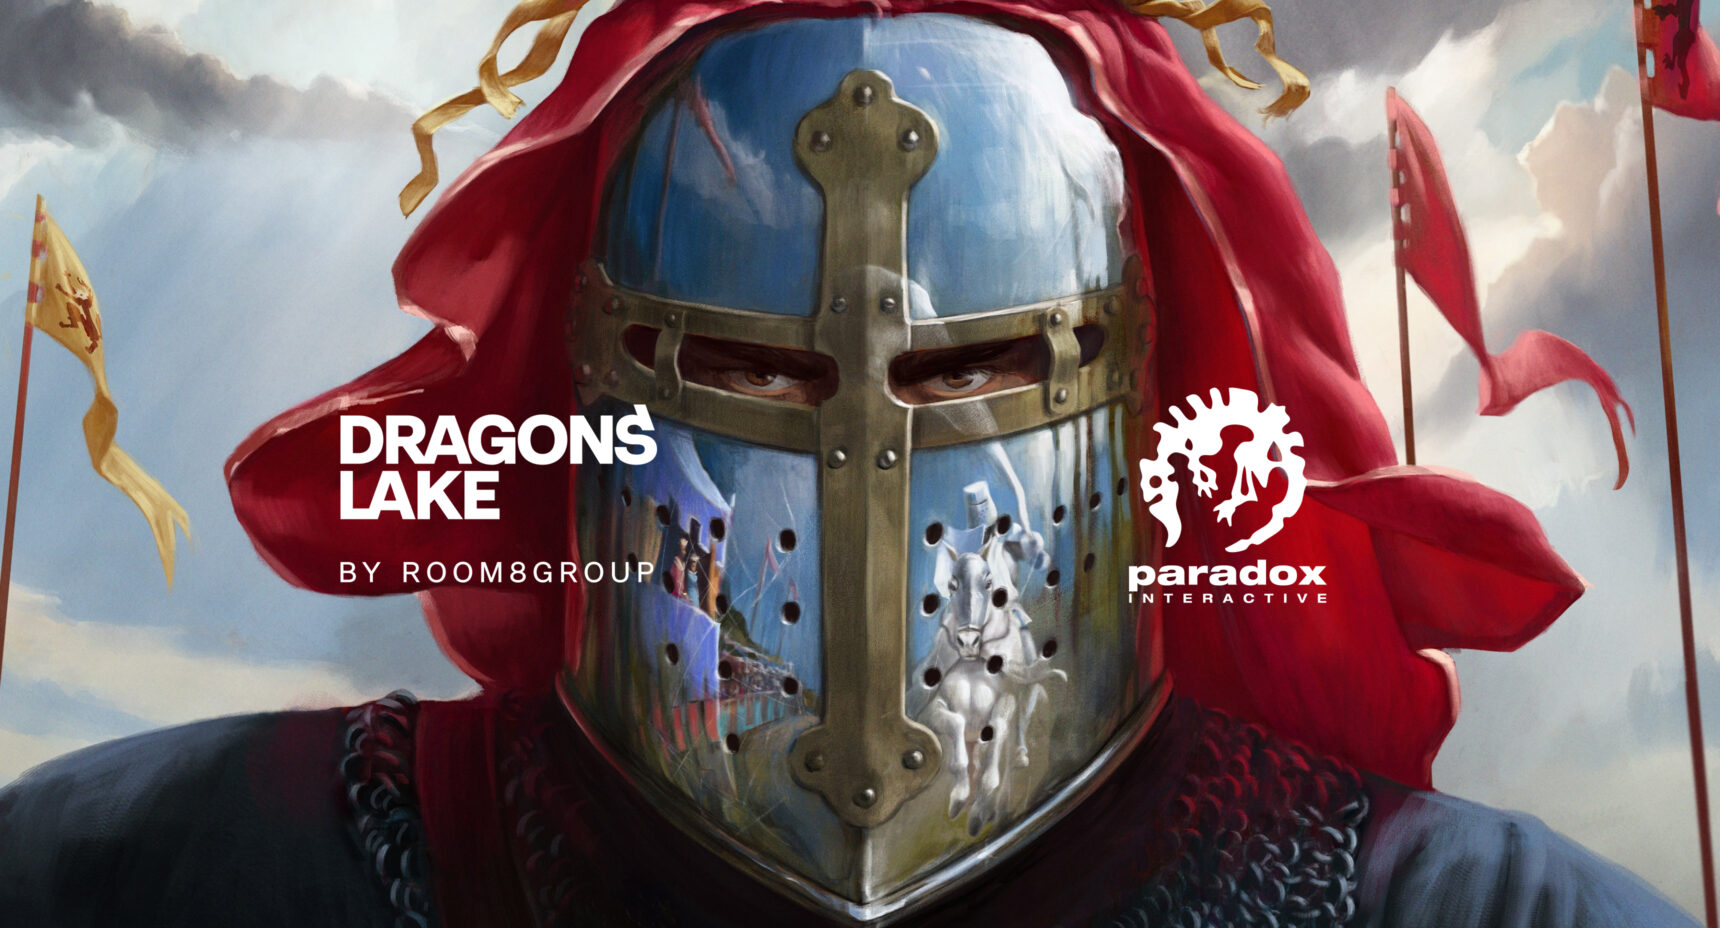 Dragons Lake by Room 8 Group Partners with Paradox Development Studio on Crusader Kings III console version